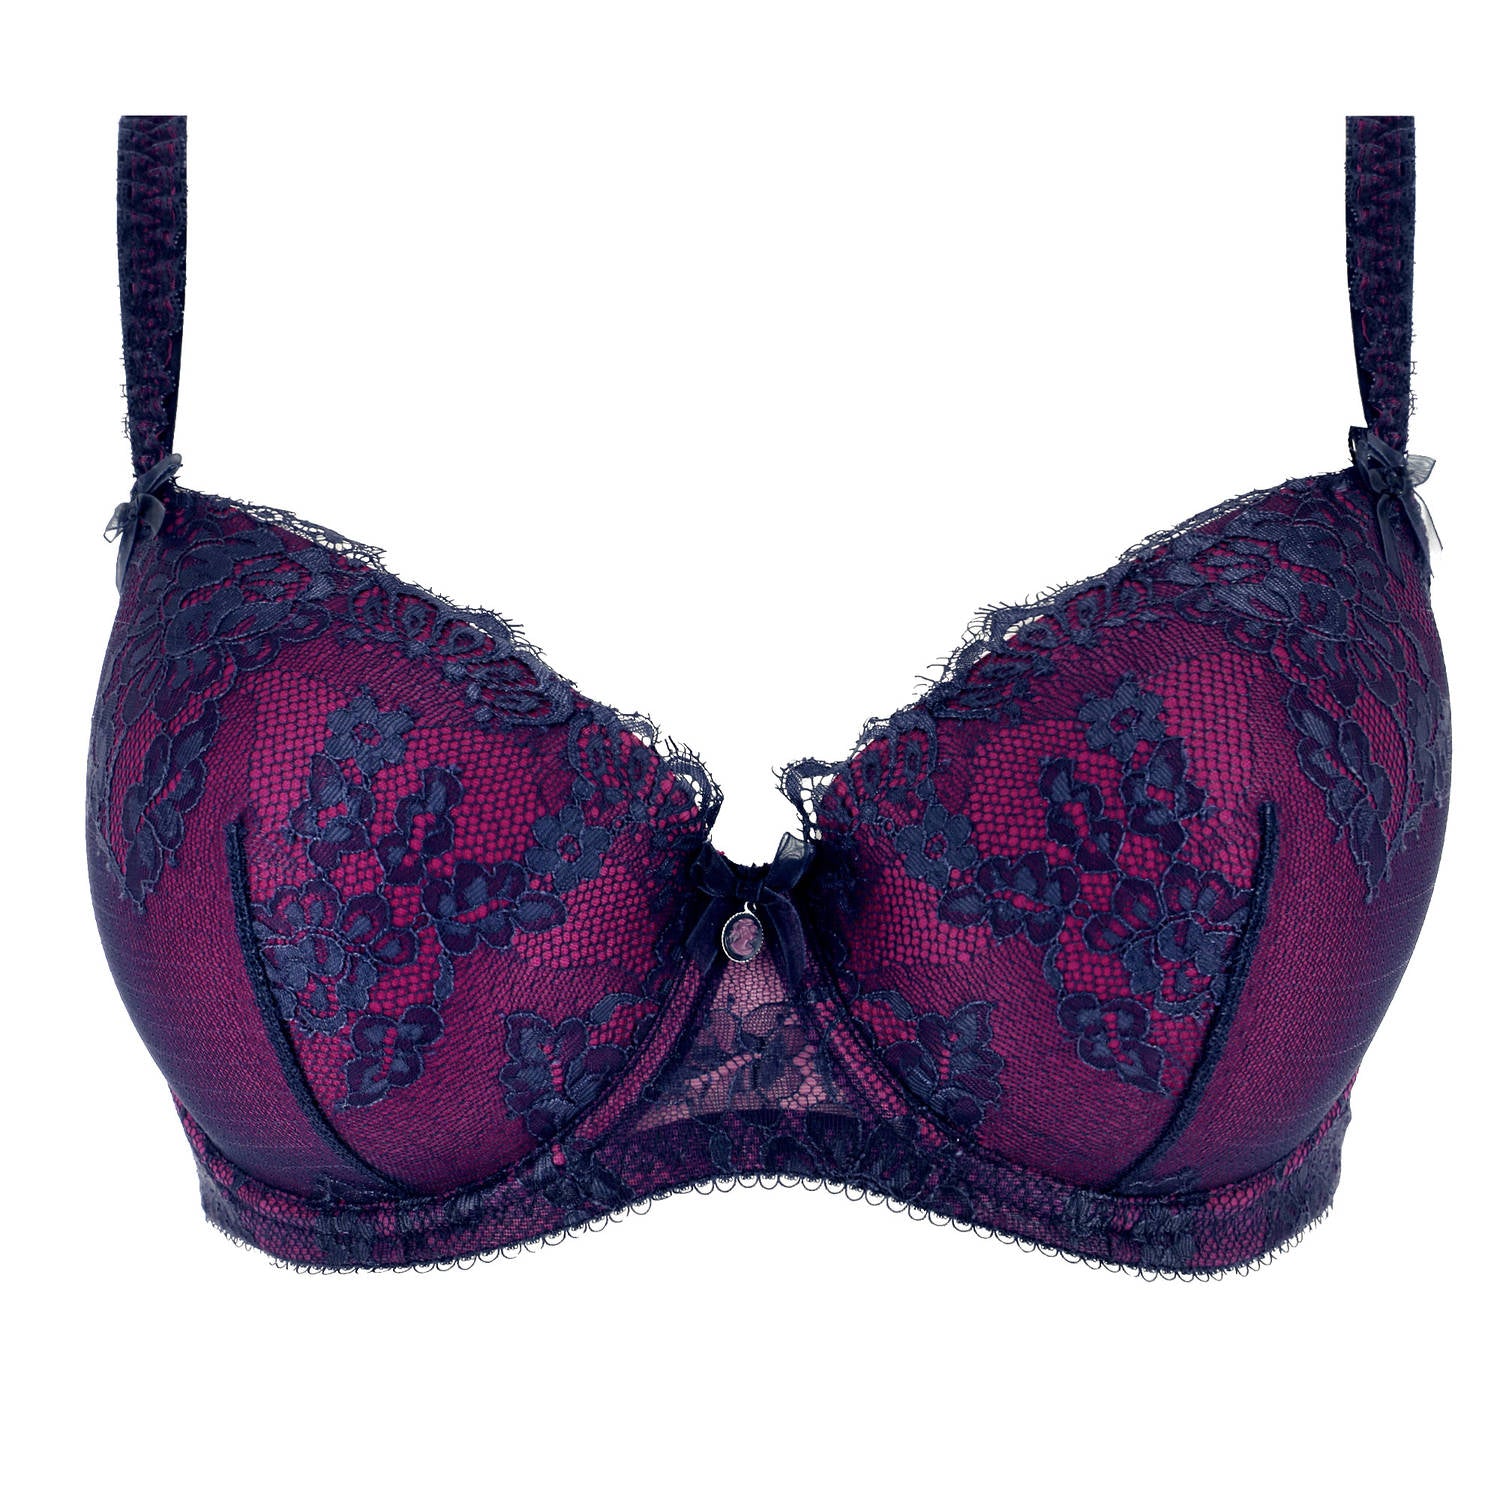 Shop Body By Victoria & T-shirt Bra 2 for SAR 325 for Bras Online